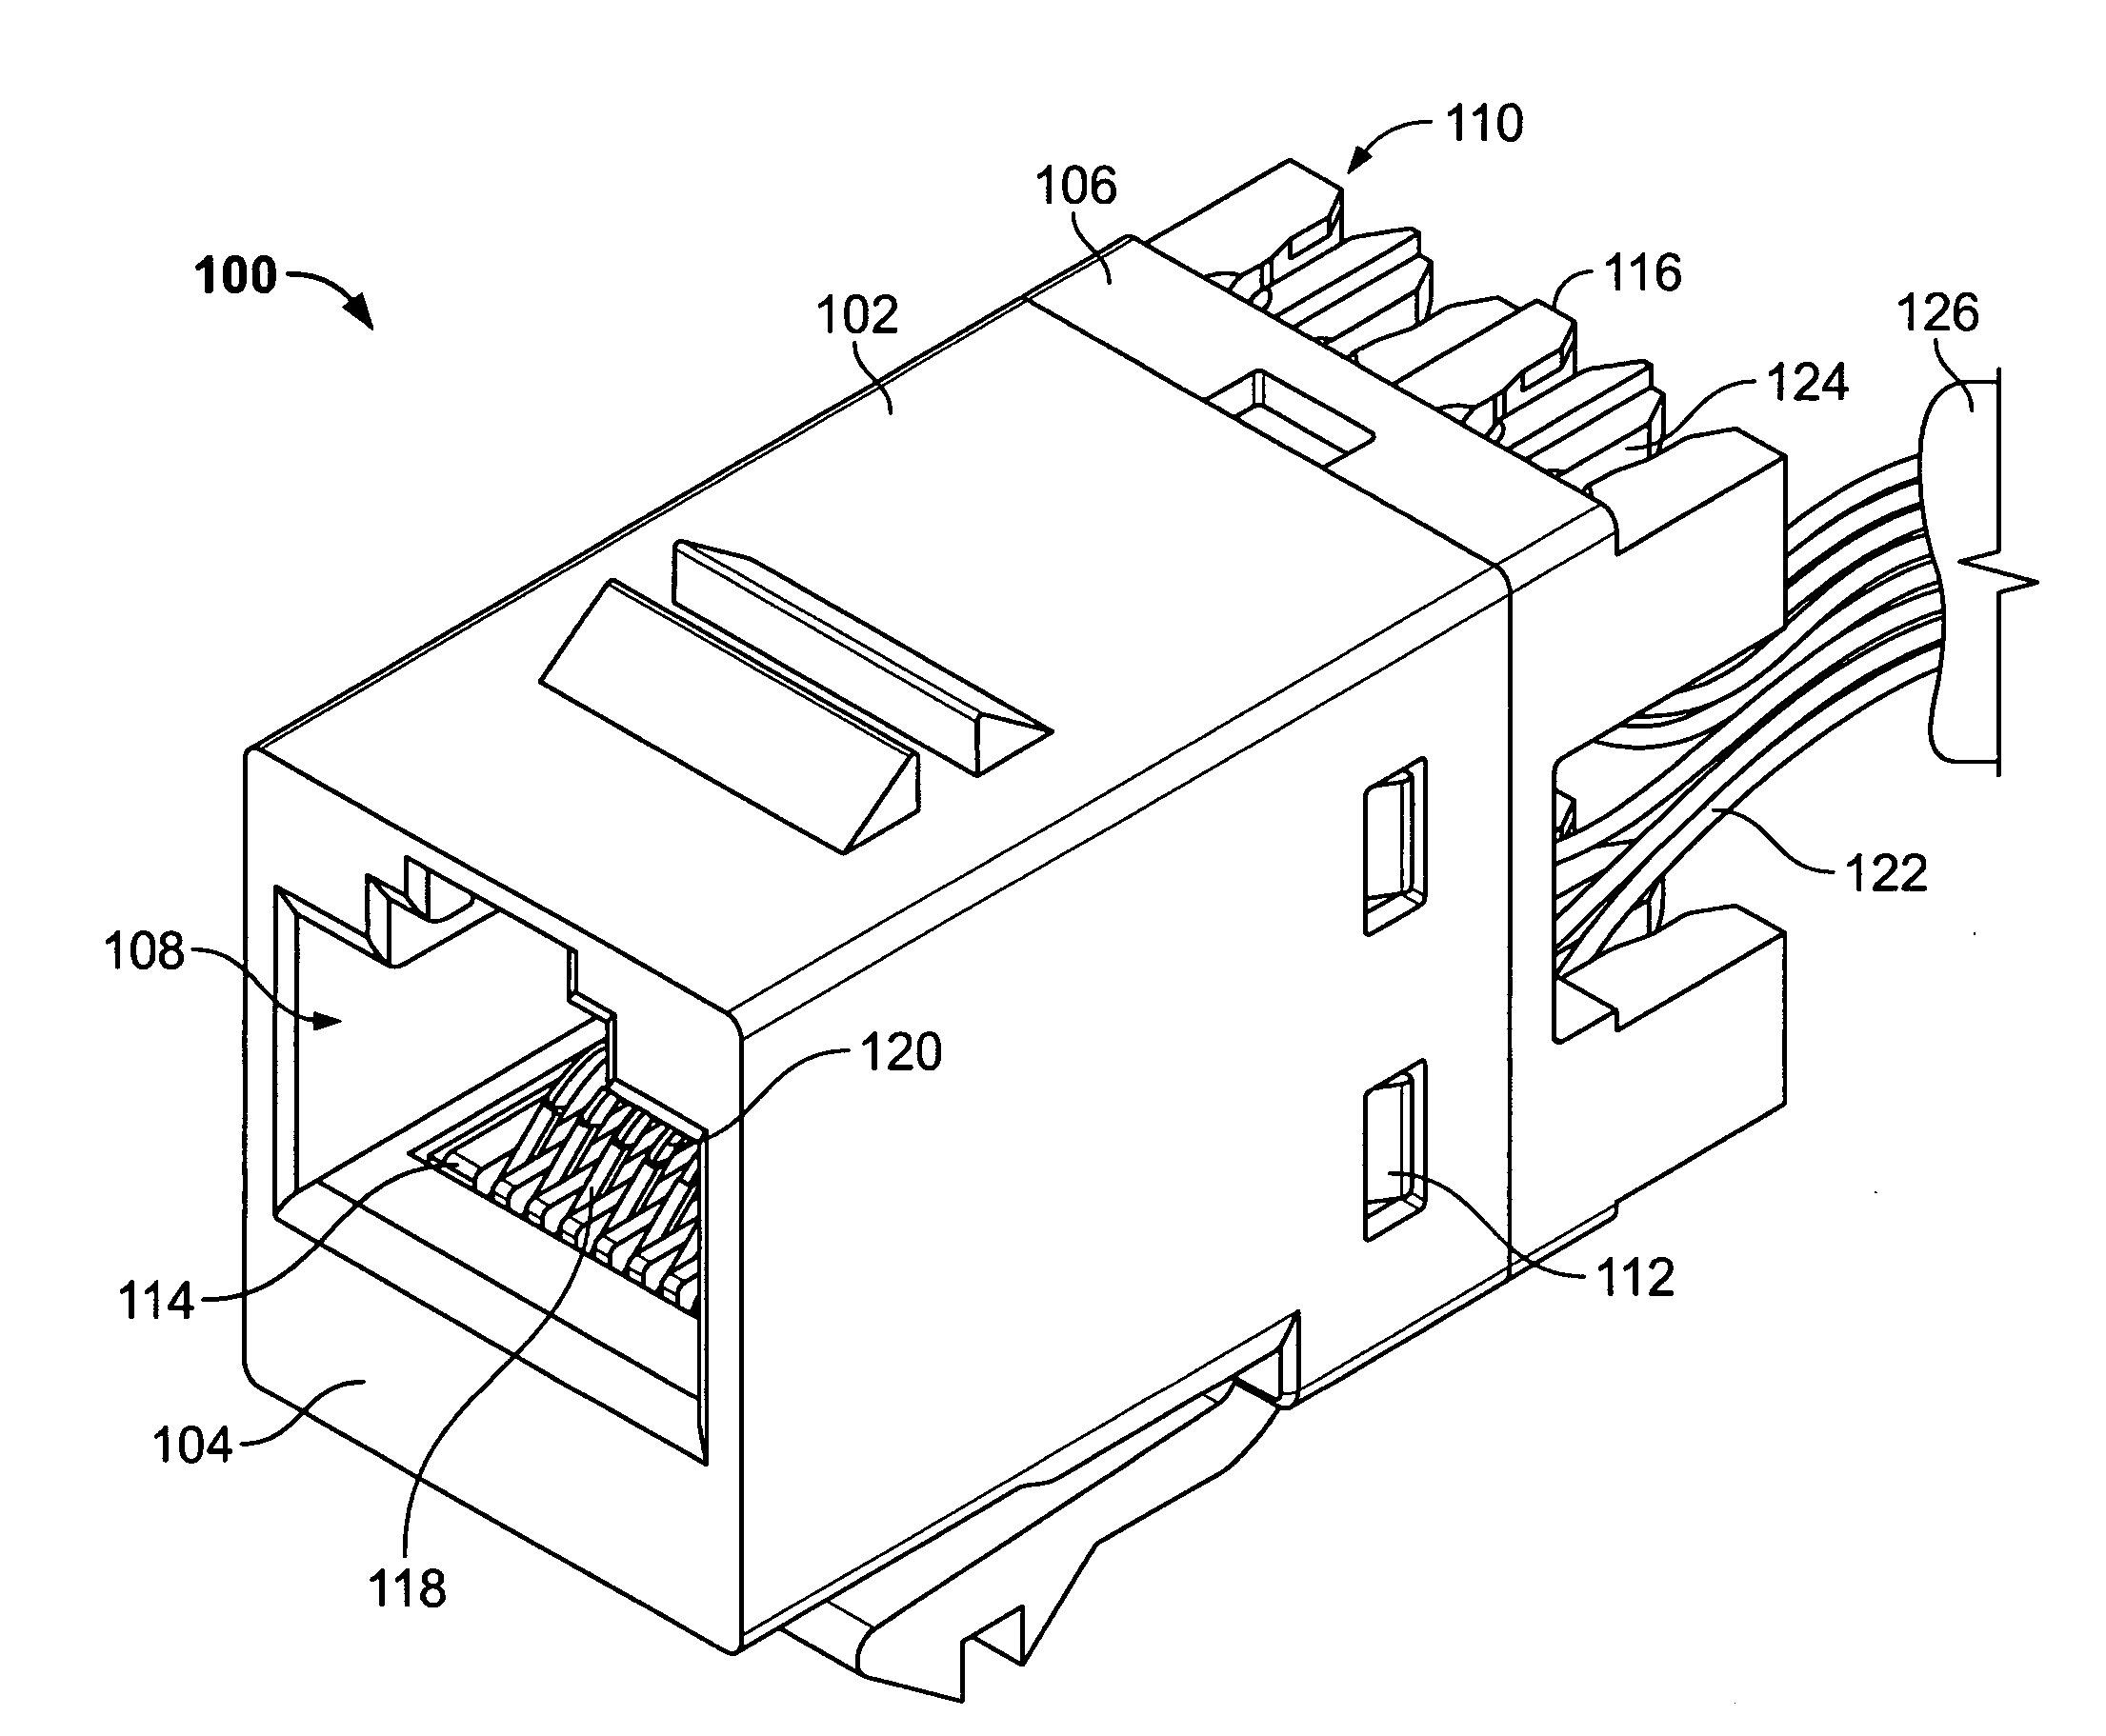 Electrical connector having contact plates